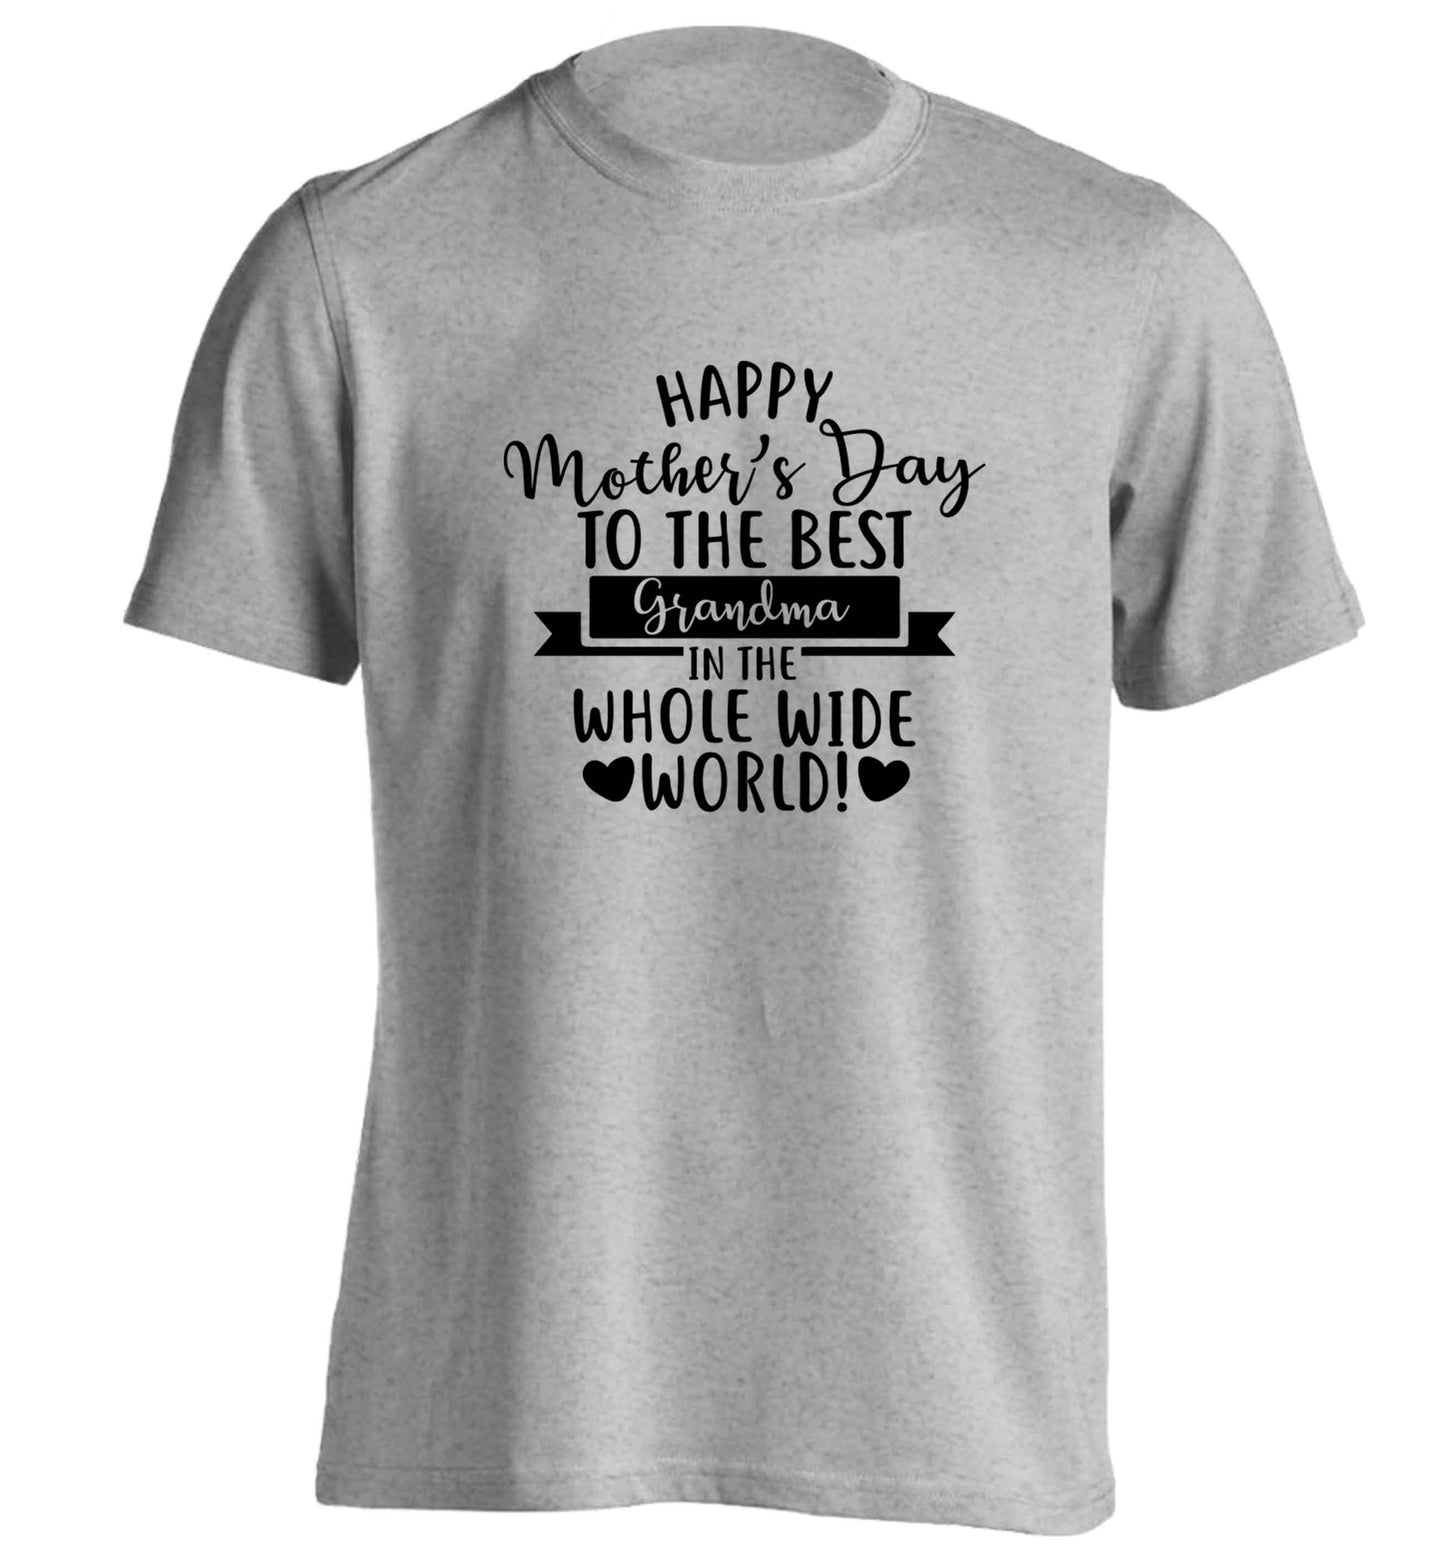 Happy mother's day to the best grandma in the world adults unisex grey Tshirt 2XL